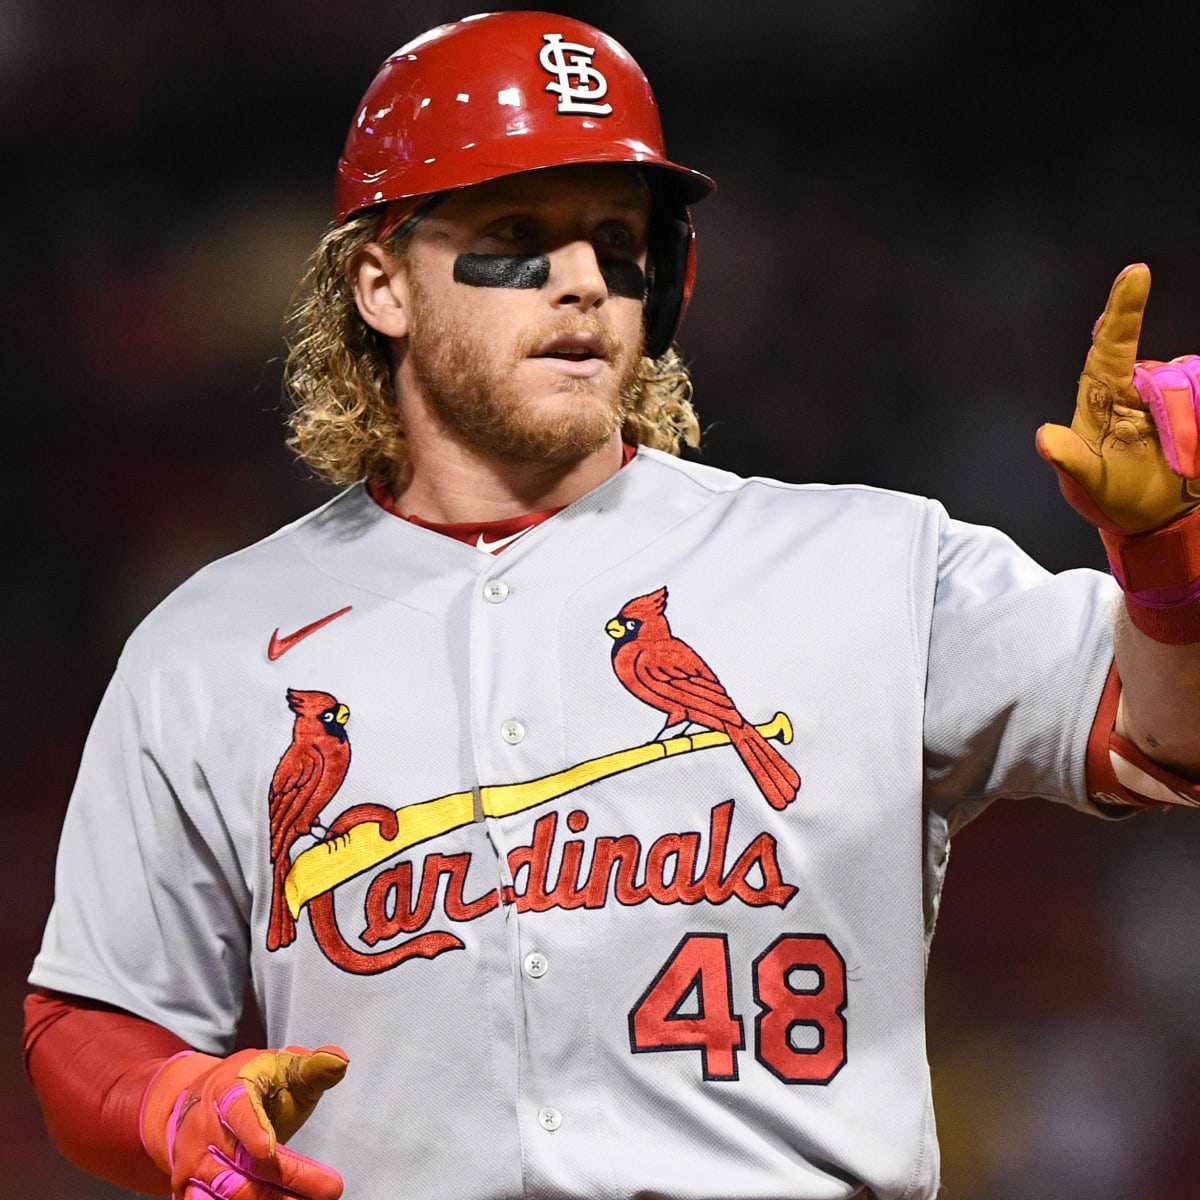 The results of the Cardinals' Bader-Montgomery swap are now clear